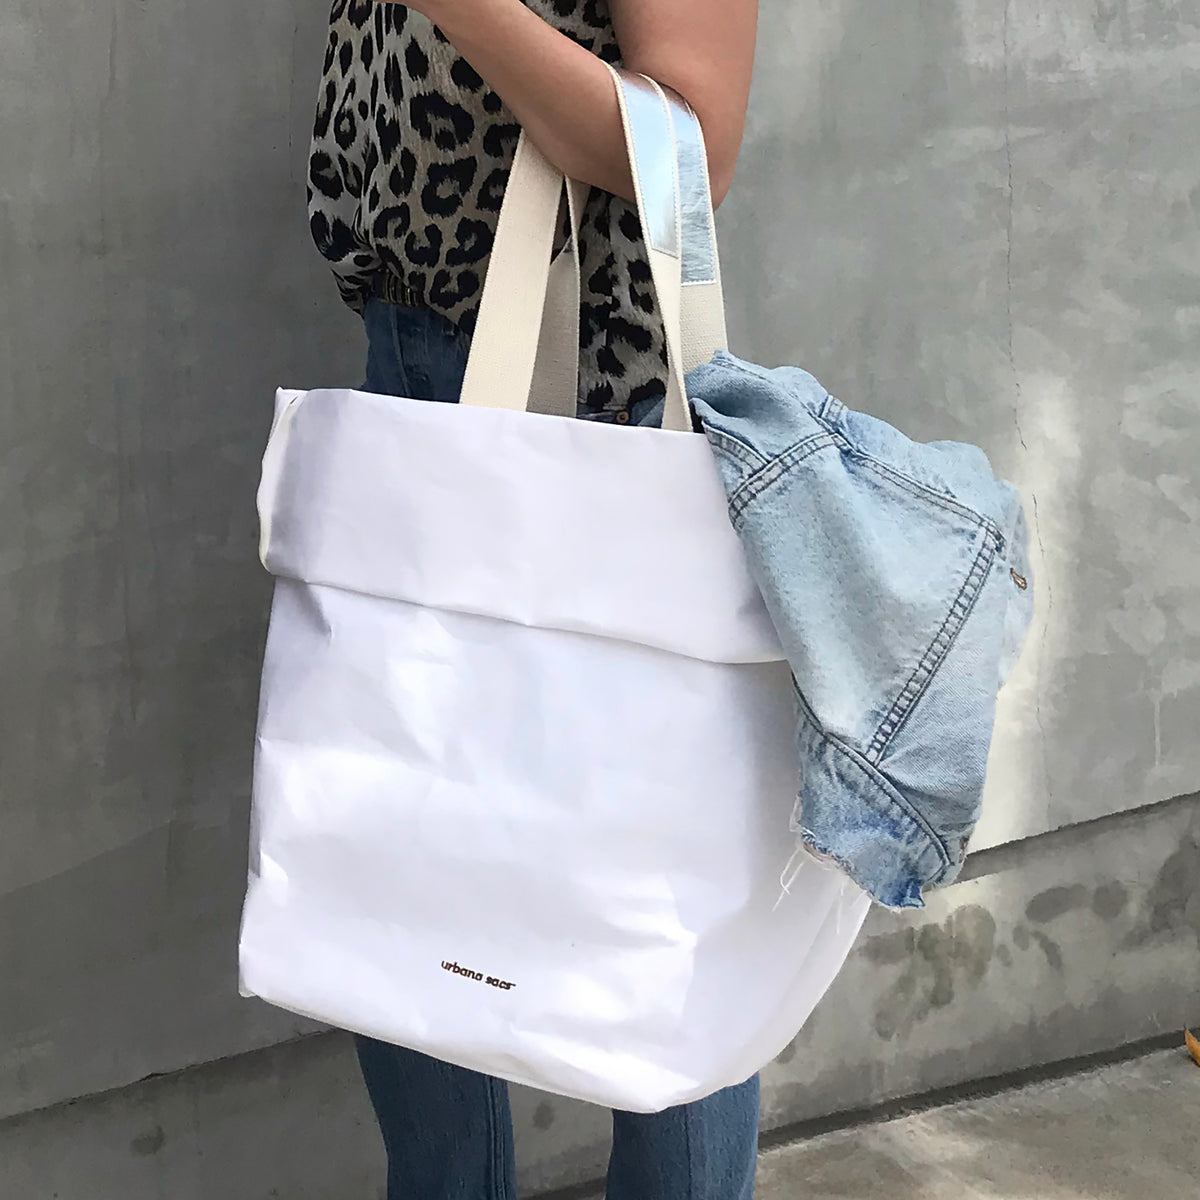 Carry-all Sacs with Two Cotton Straps